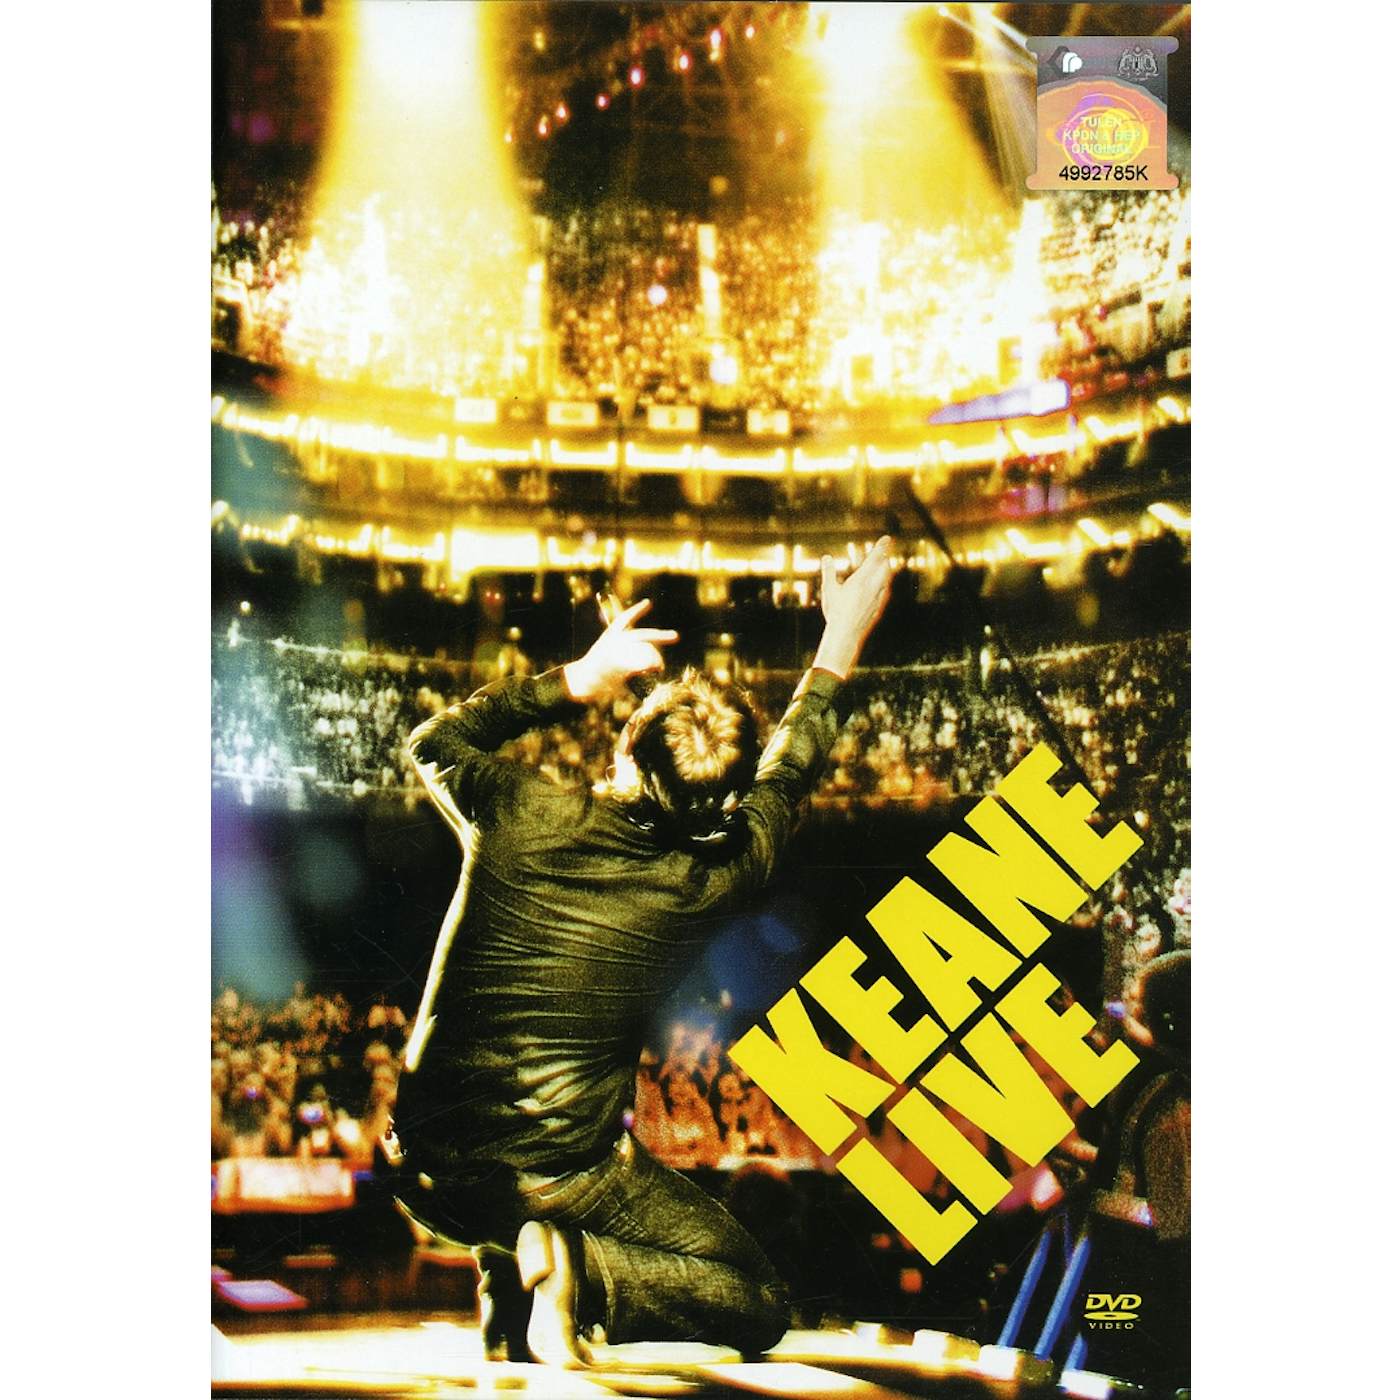 Keane LIVE AT THE 02 DVD